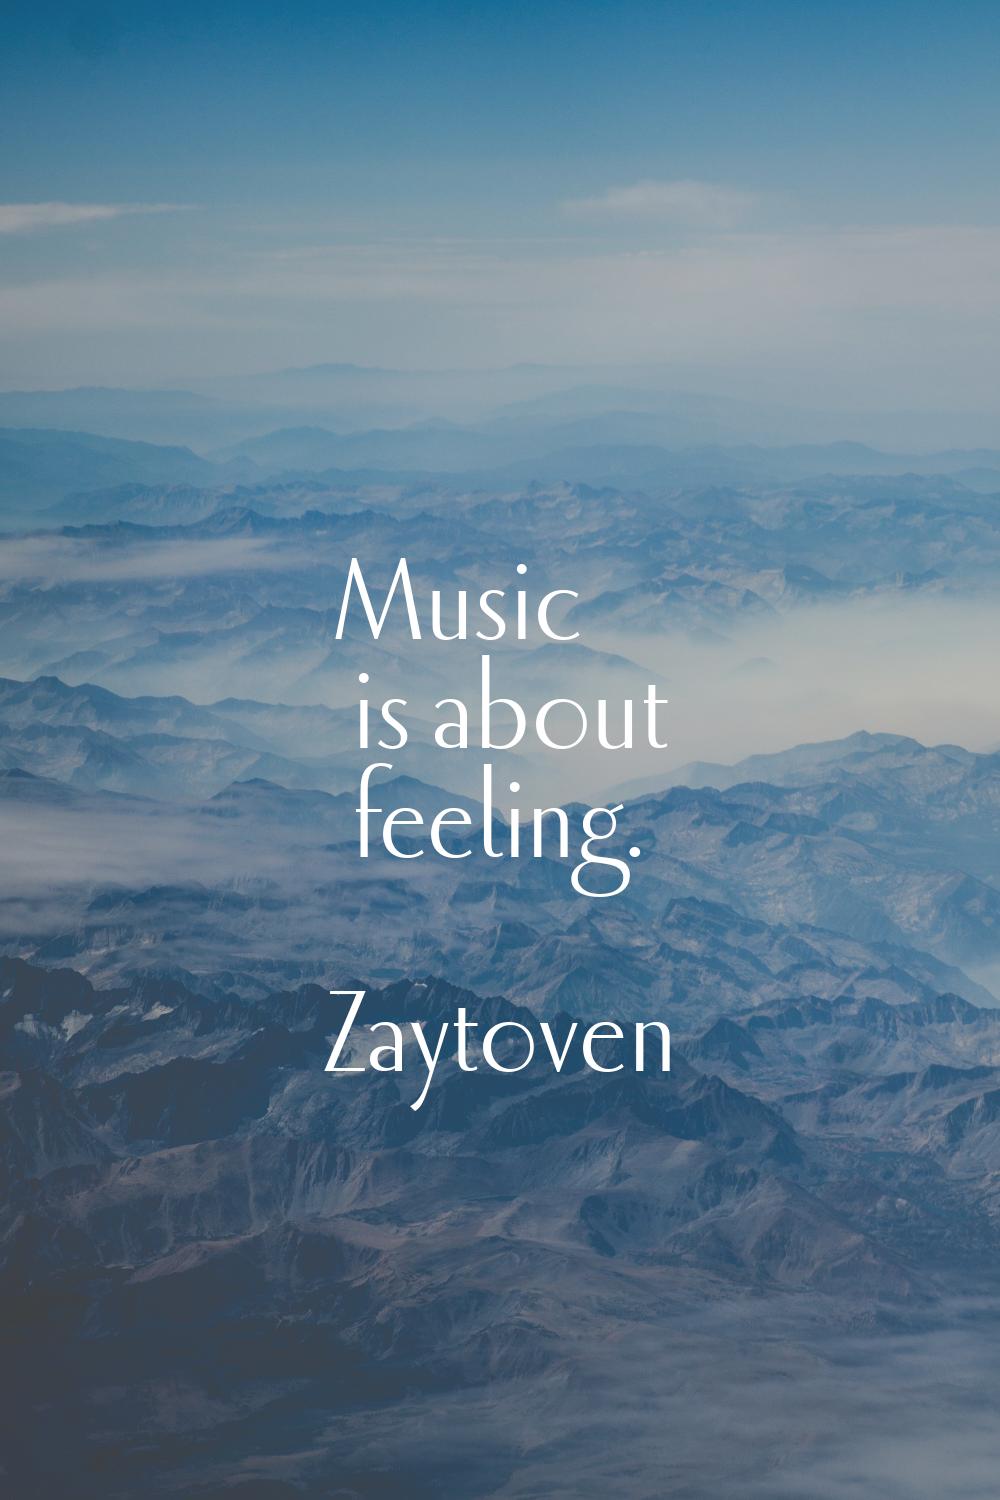 Music is about feeling.